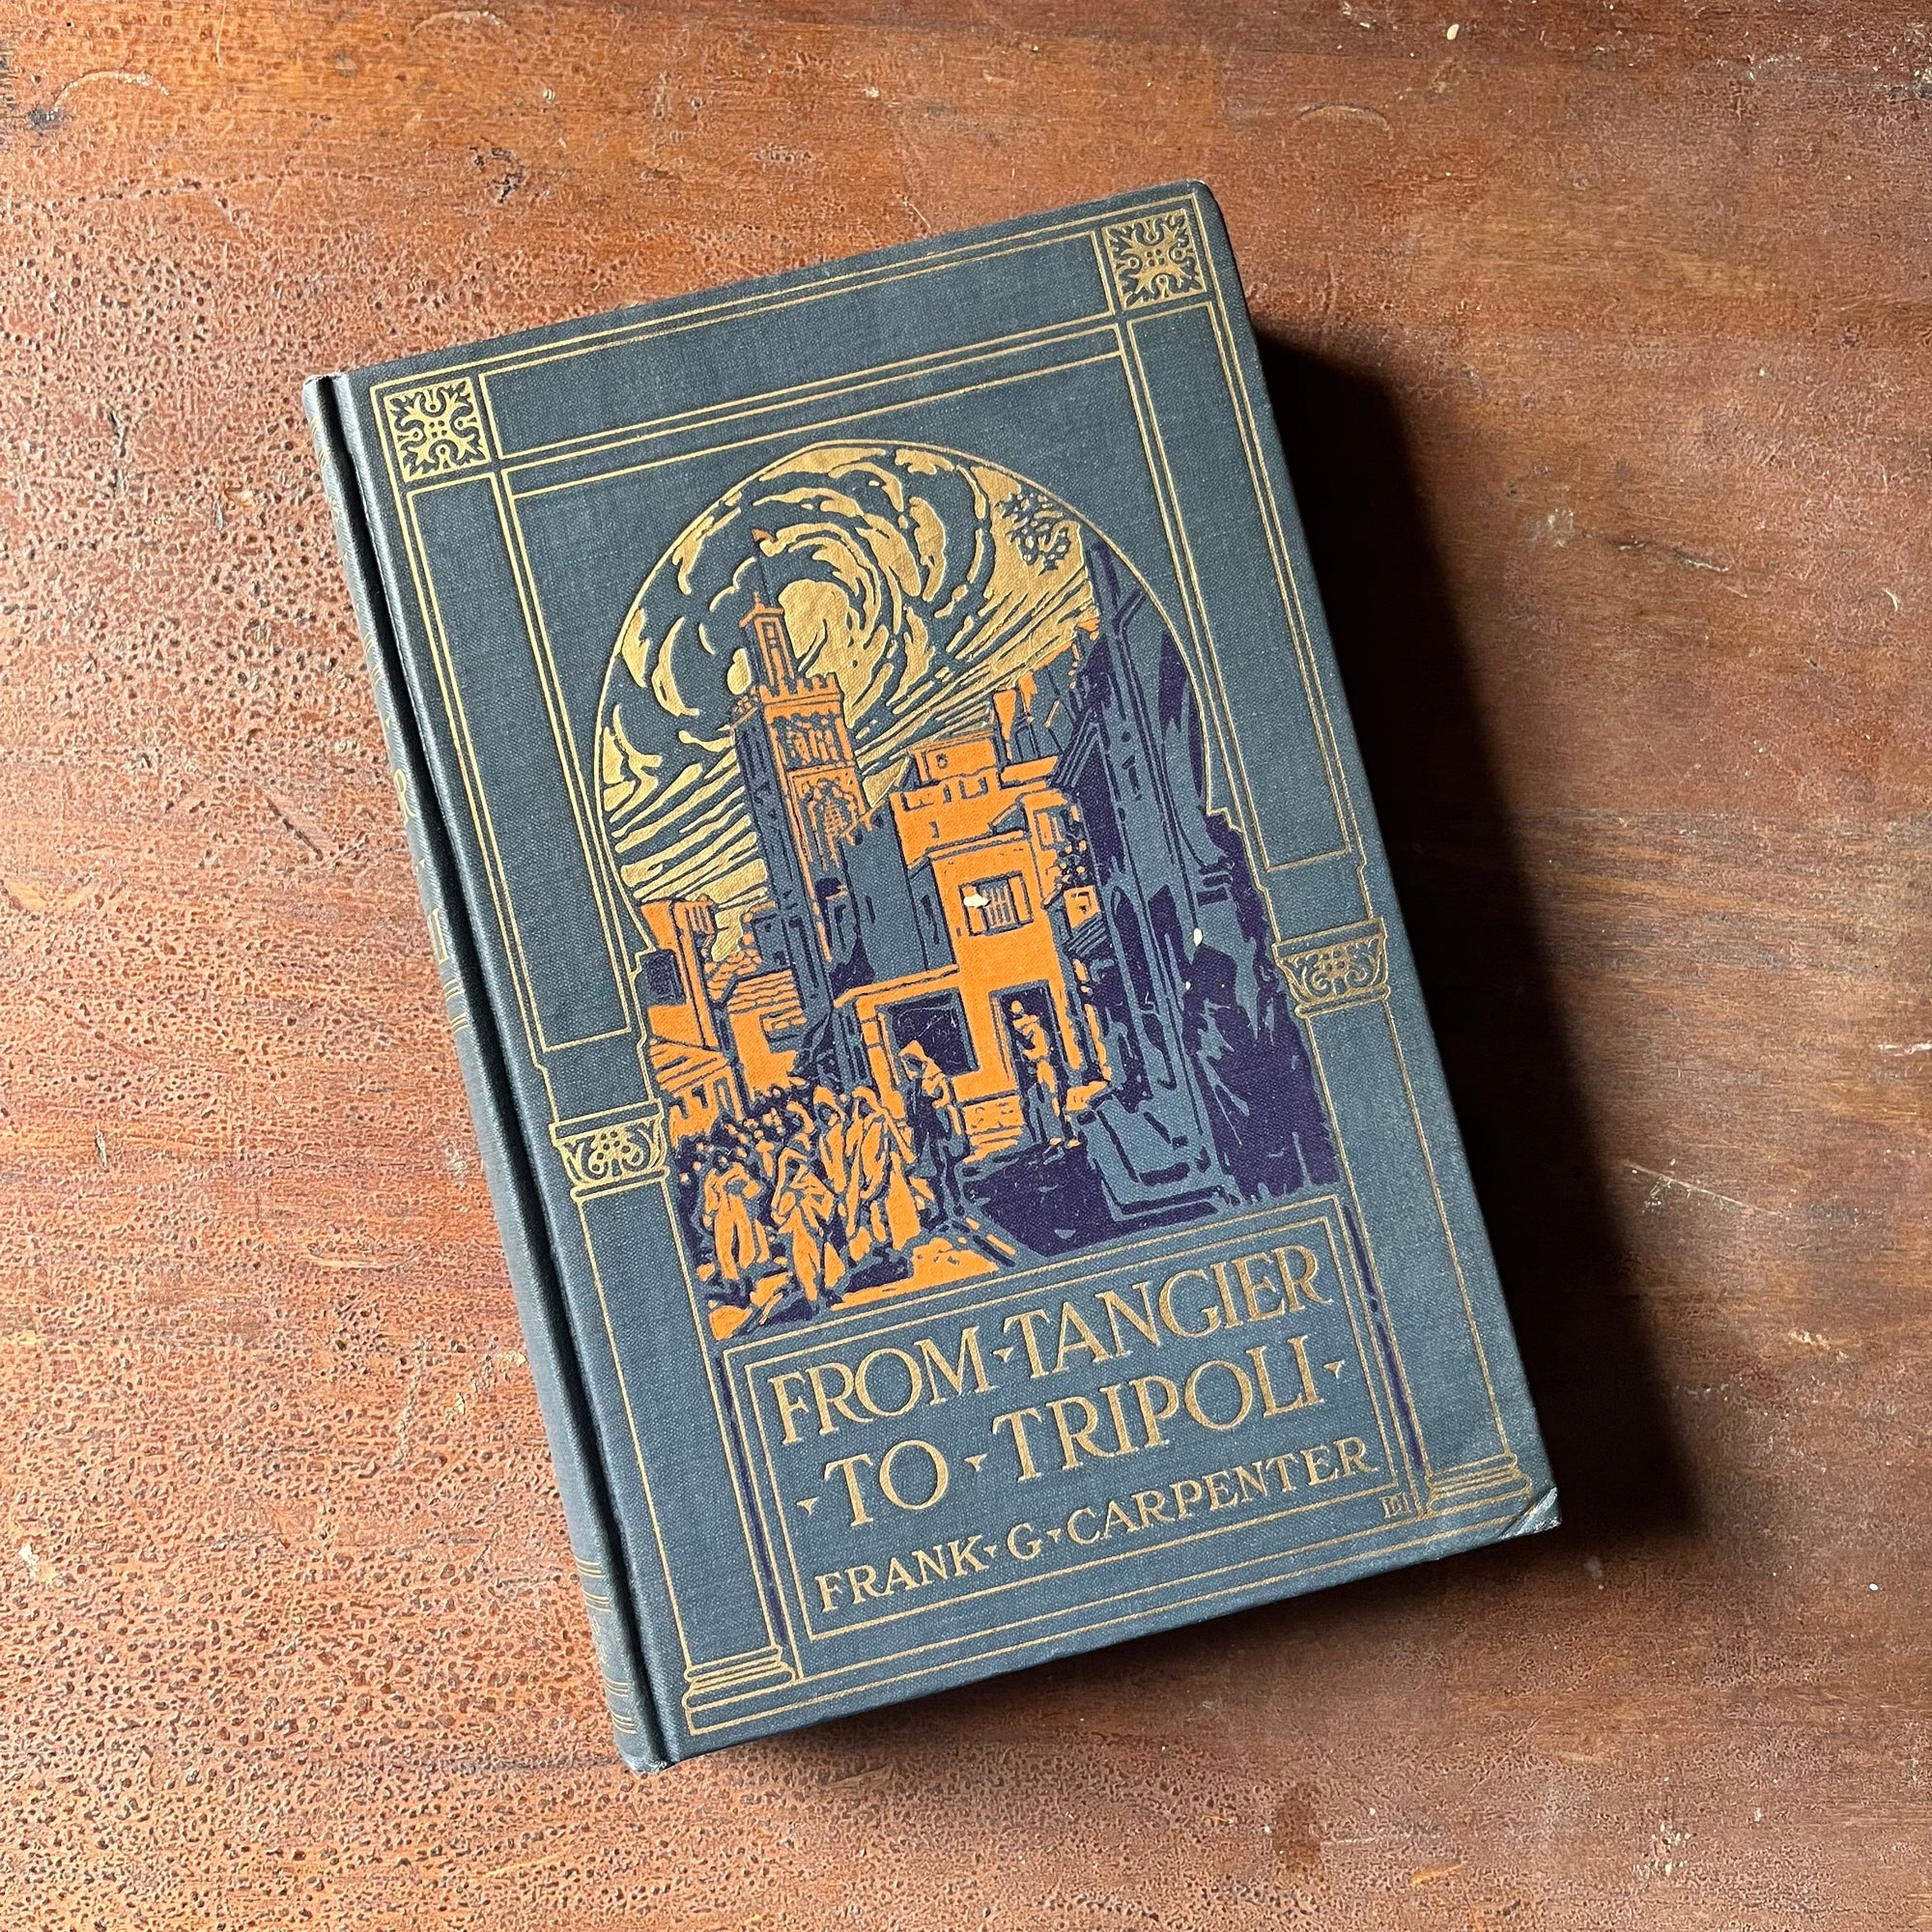 From Tangier to Tripoli by Frank G. Carpenter - 1923 First Edition - view of the embossed front cover